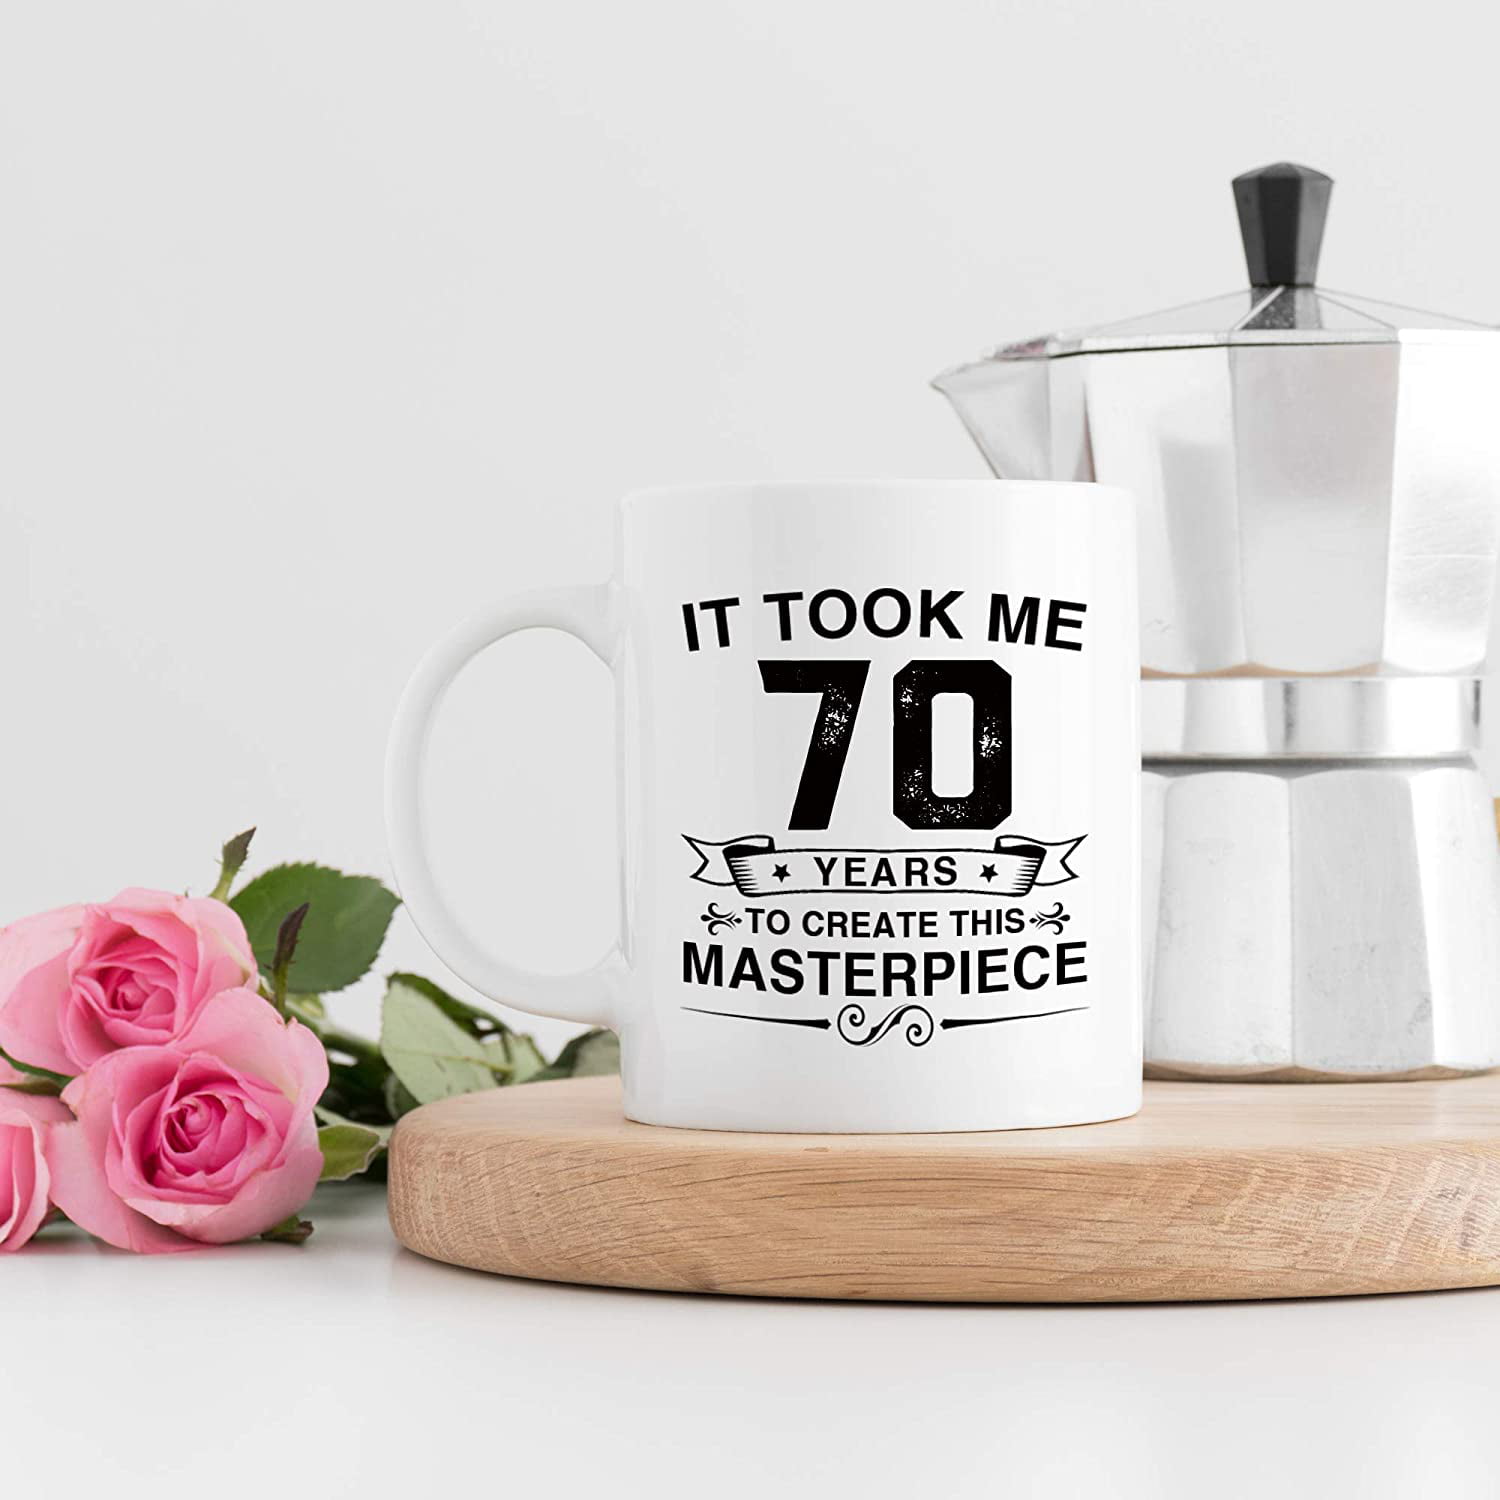 Week's Top Story: 70 Gifts For Women In Their 30s